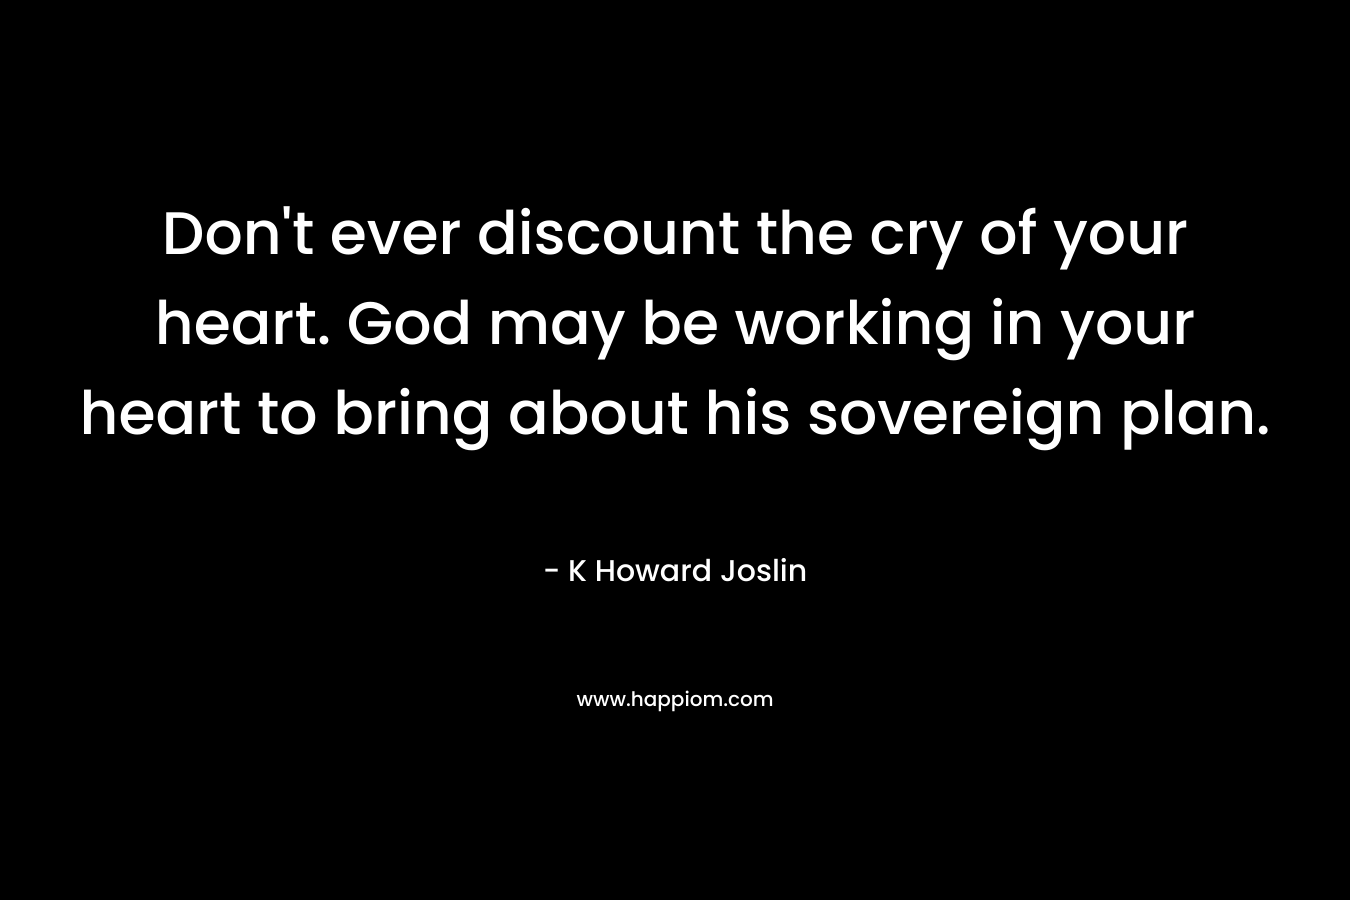 Don’t ever discount the cry of your heart. God may be working in your heart to bring about his sovereign plan. – K Howard Joslin